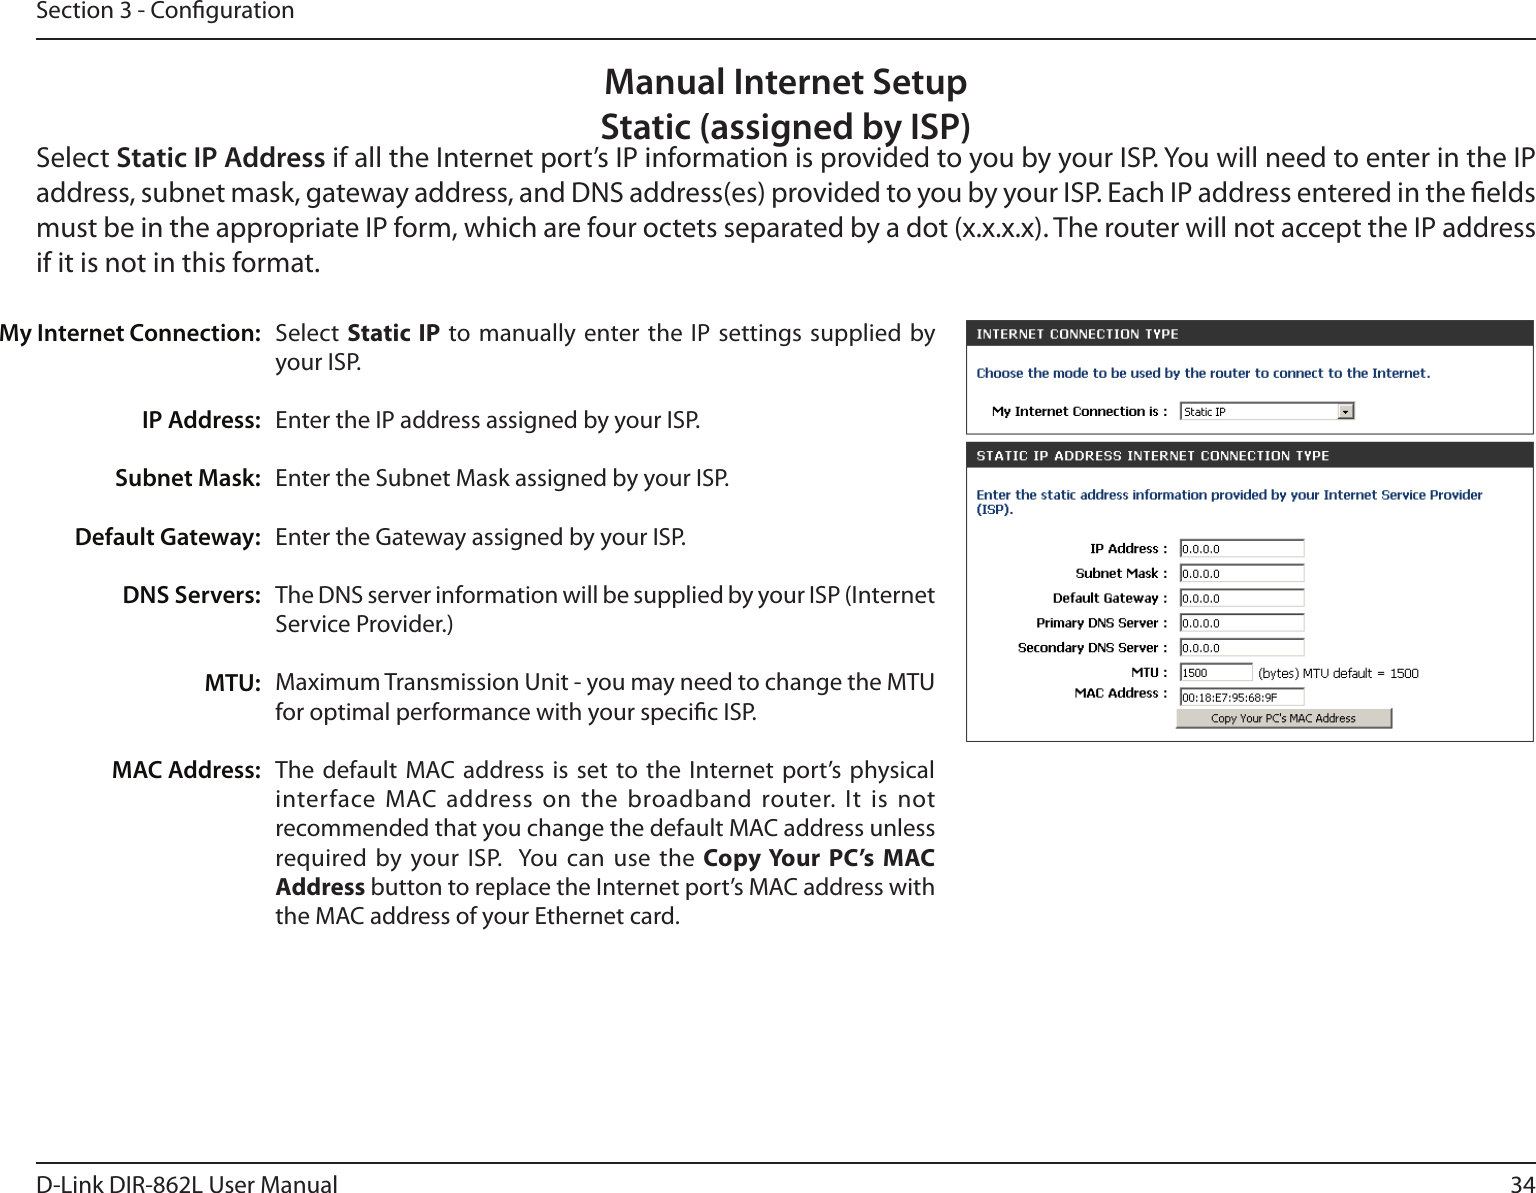 34D-Link DIR-862L User ManualSection 3 - CongurationSelect  Static IP to manually enter the IP settings supplied by your ISP.Enter the IP address assigned by your ISP.Enter the Subnet Mask assigned by your ISP.Enter the Gateway assigned by your ISP.The DNS server information will be supplied by your ISP (Internet Service Provider.)Maximum Transmission Unit - you may need to change the MTU for optimal performance with your specic ISP. The default MAC address is set to the Internet port’s physical interface MAC address on the broadband router. It is not recommended that you change the default MAC address unless required by your ISP.  You can use the Copy Your PC’s MAC Address button to replace the Internet port’s MAC address with the MAC address of your Ethernet card.My Internet Connection:IP Address:Subnet Mask:Default Gateway:DNS Servers:MTU:MAC Address:Manual Internet SetupStatic (assigned by ISP)Select Static IP Address if all the Internet port’s IP information is provided to you by your ISP. You will need to enter in the IP address, subnet mask, gateway address, and DNS address(es) provided to you by your ISP. Each IP address entered in the elds must be in the appropriate IP form, which are four octets separated by a dot (x.x.x.x). The router will not accept the IP address if it is not in this format.